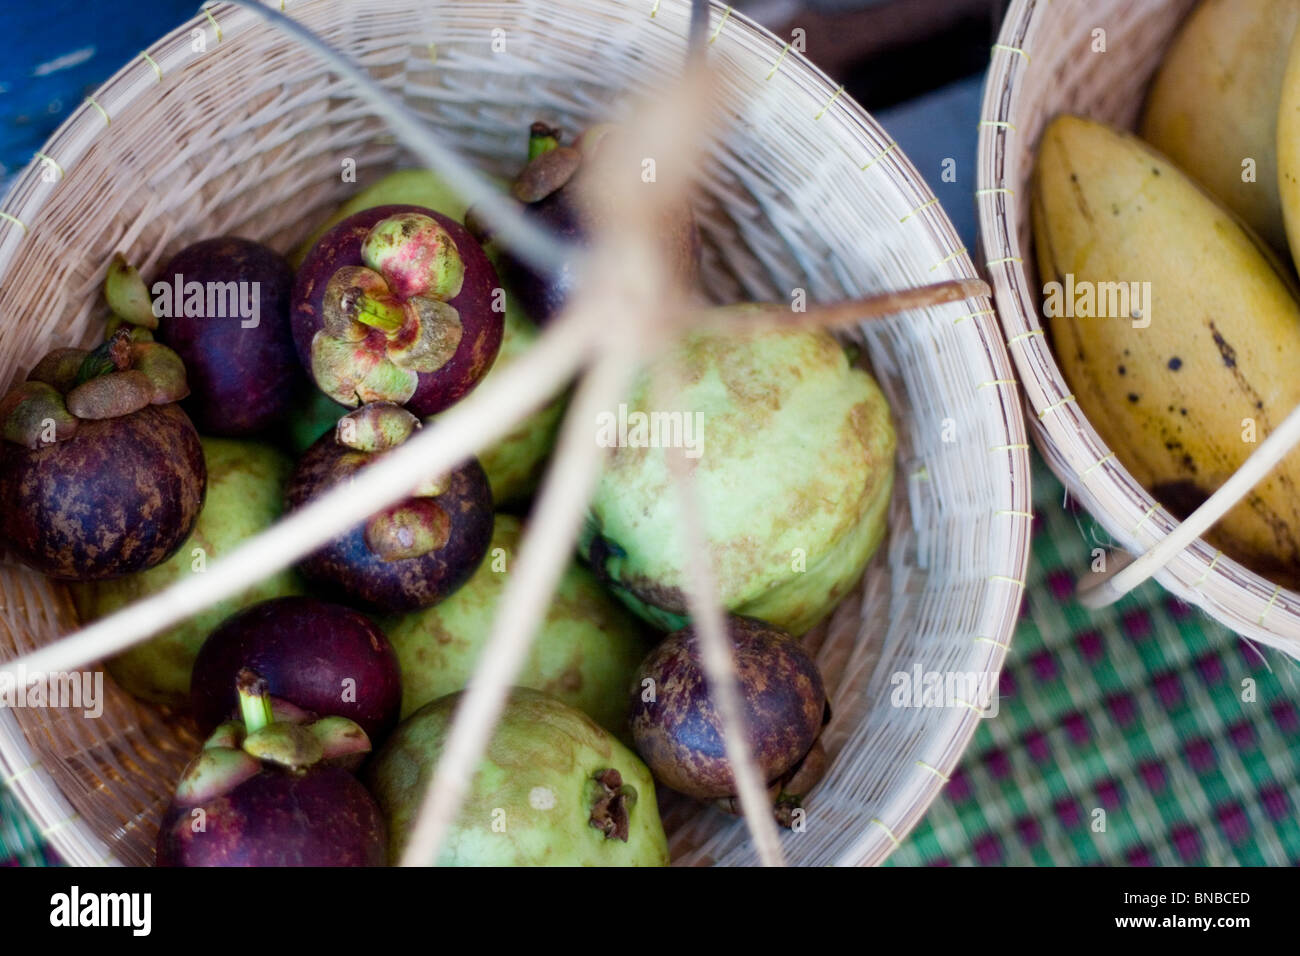 Mangosteens and other tropical fruit in a basket, Thailand Stock Photo